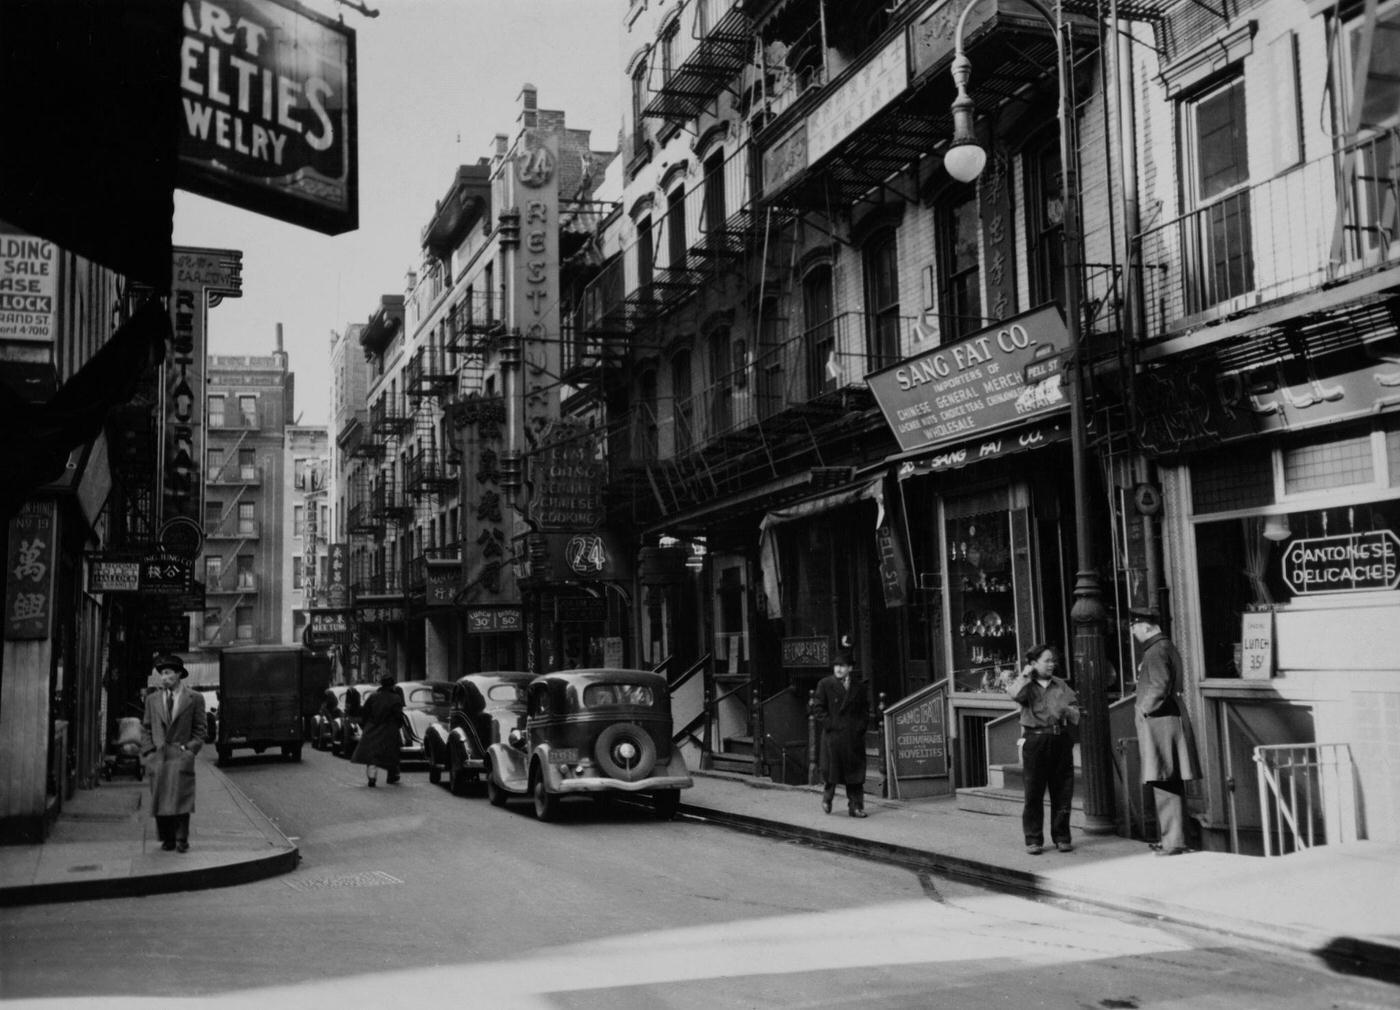 Cars Parked Along The Sidewalk With Pedestrians Outside Stores On Mott Street In Chinatown, Manhattan, 1945.